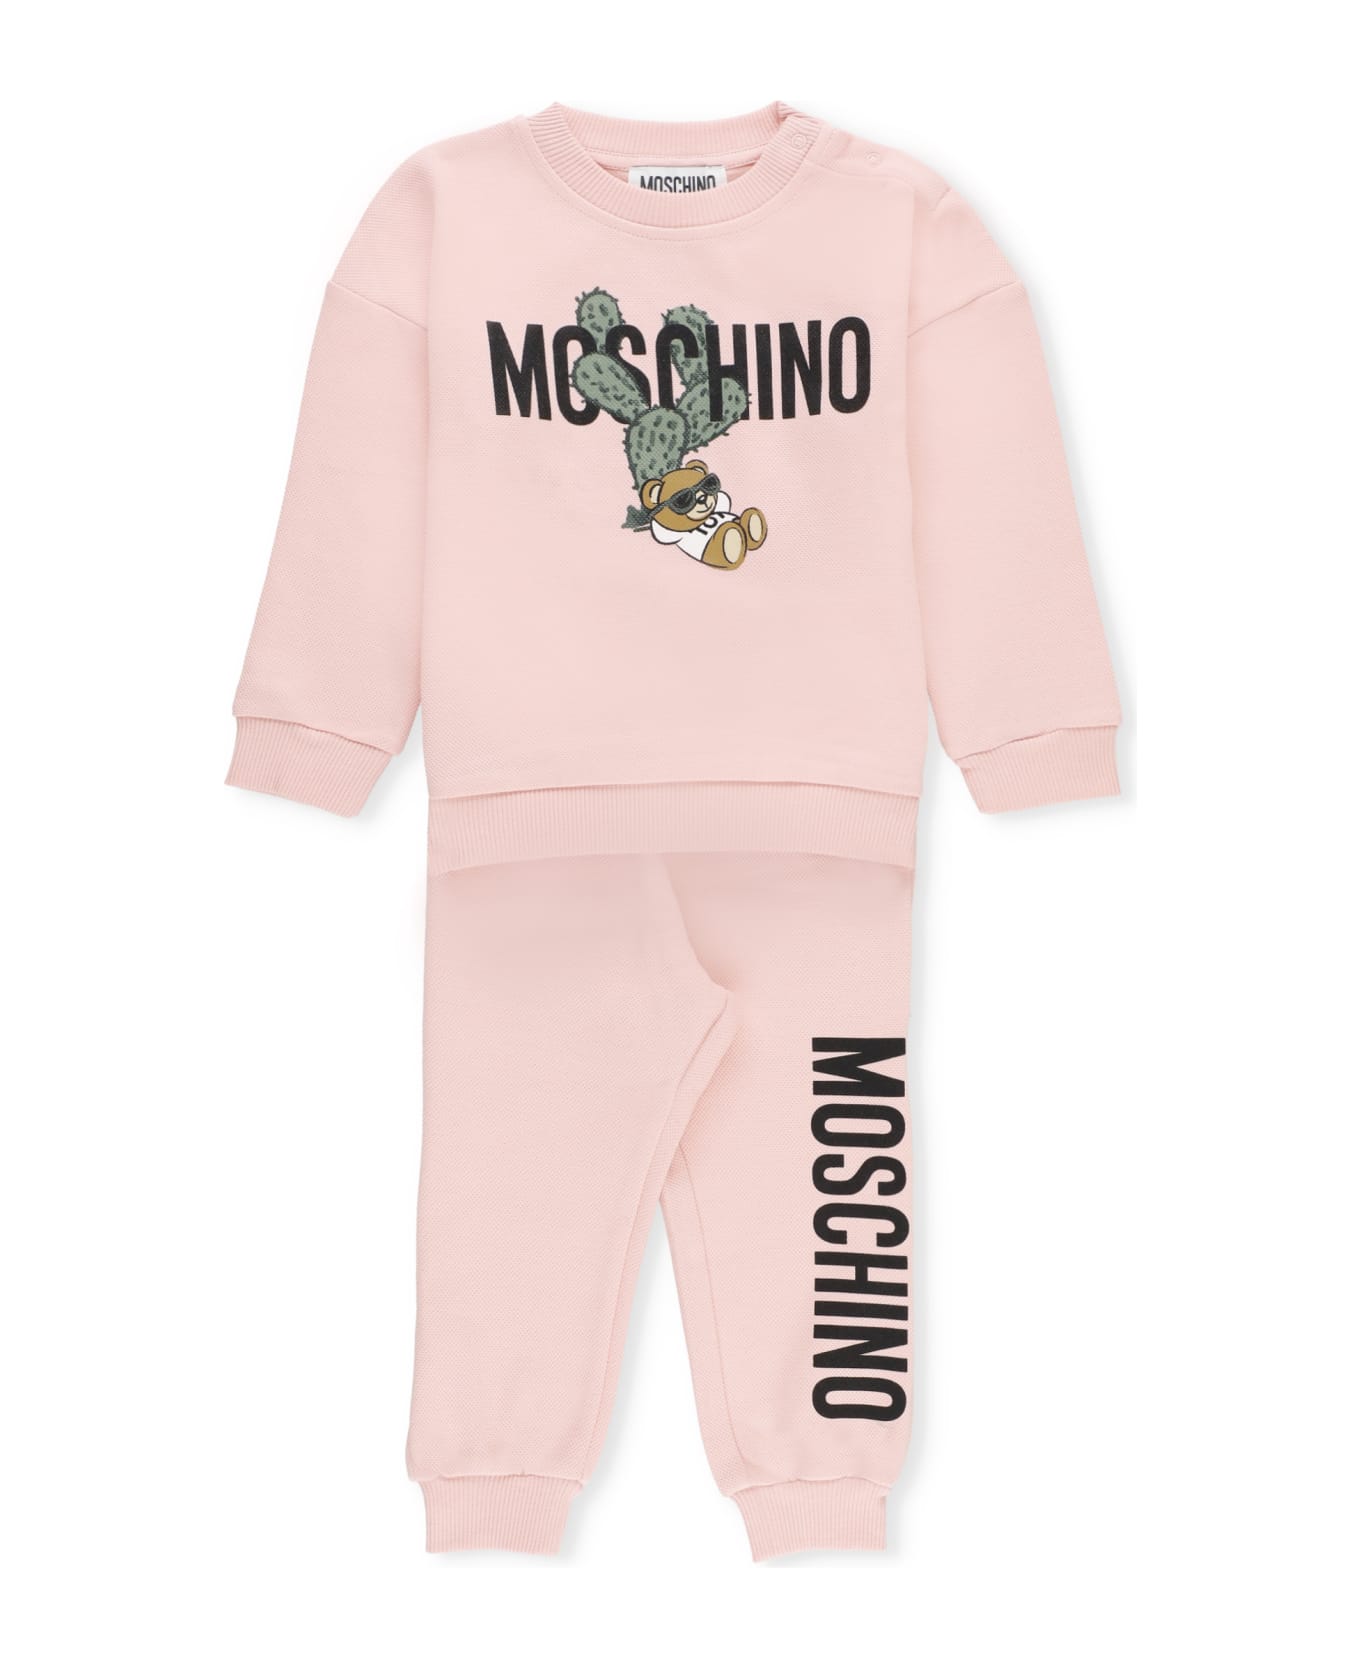 Moschino Cactus Teddy Bear Two Piece Suit - Pink ボディスーツ＆セットアップ